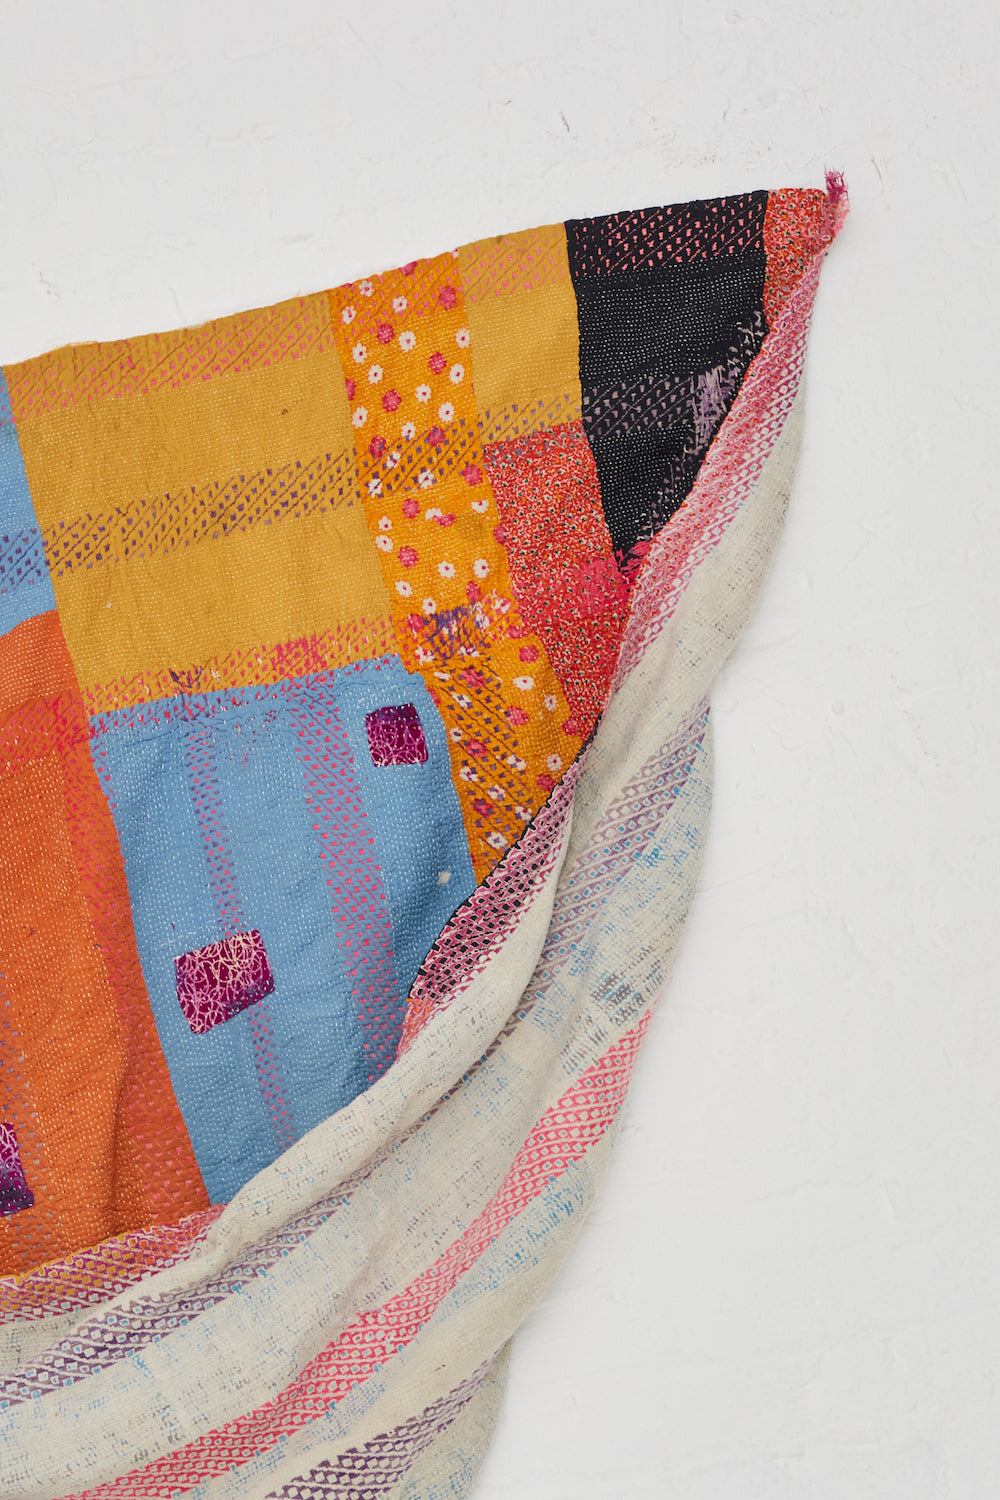 Travel Find - One of a Kind Kantha Quilt in Multi IV front and back view detail.